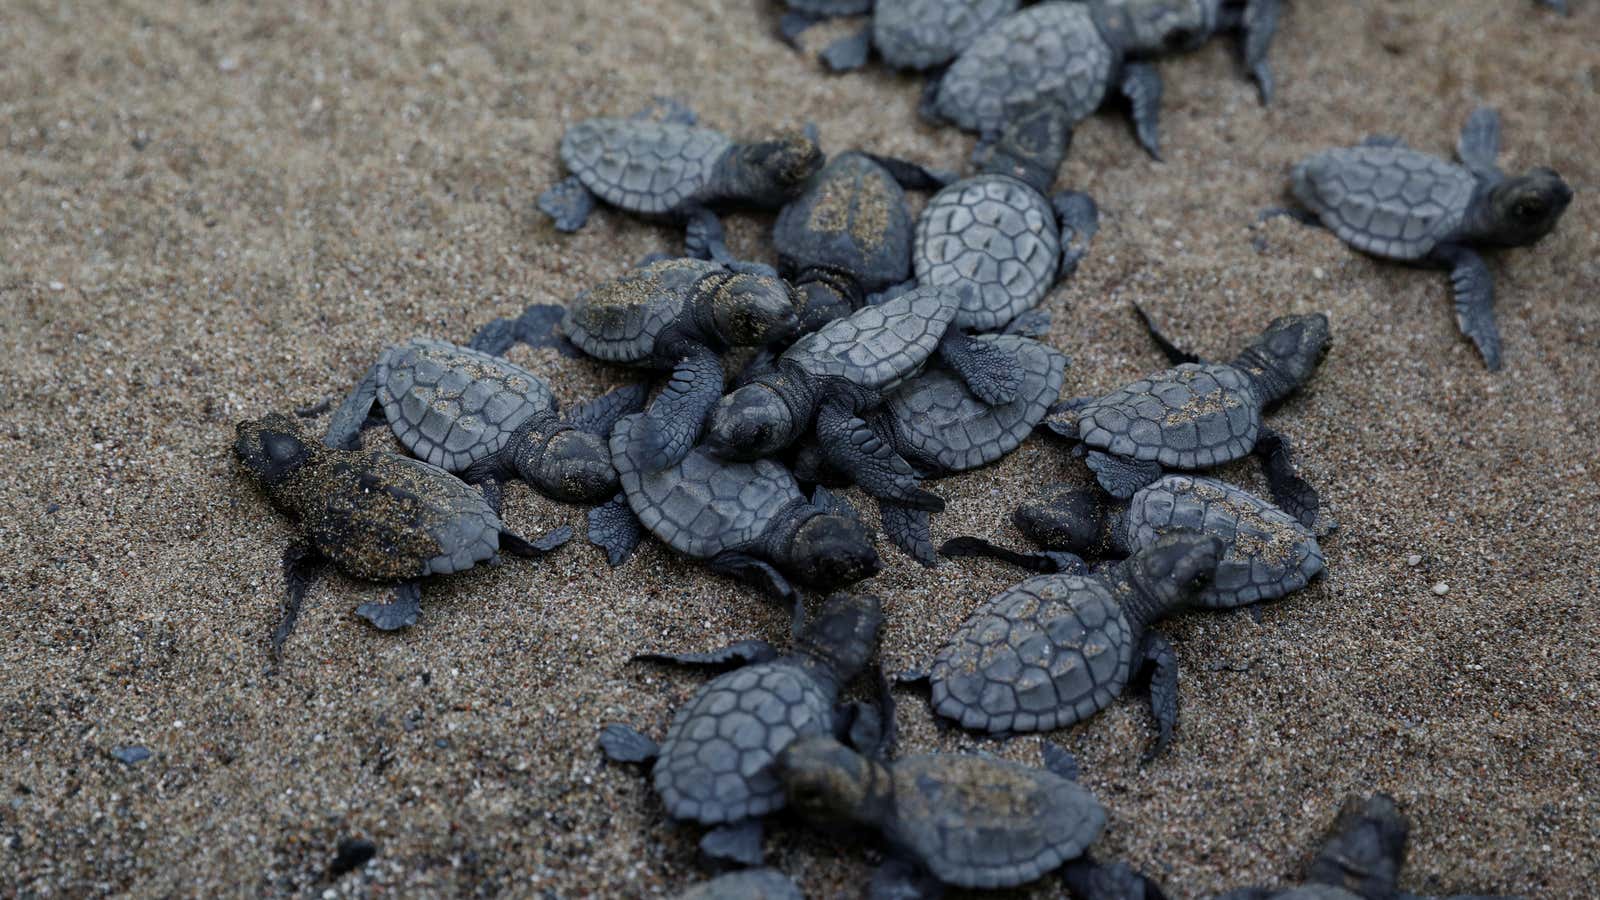 An international criminal conspiracy involving tiny turtles has yielded convictions.